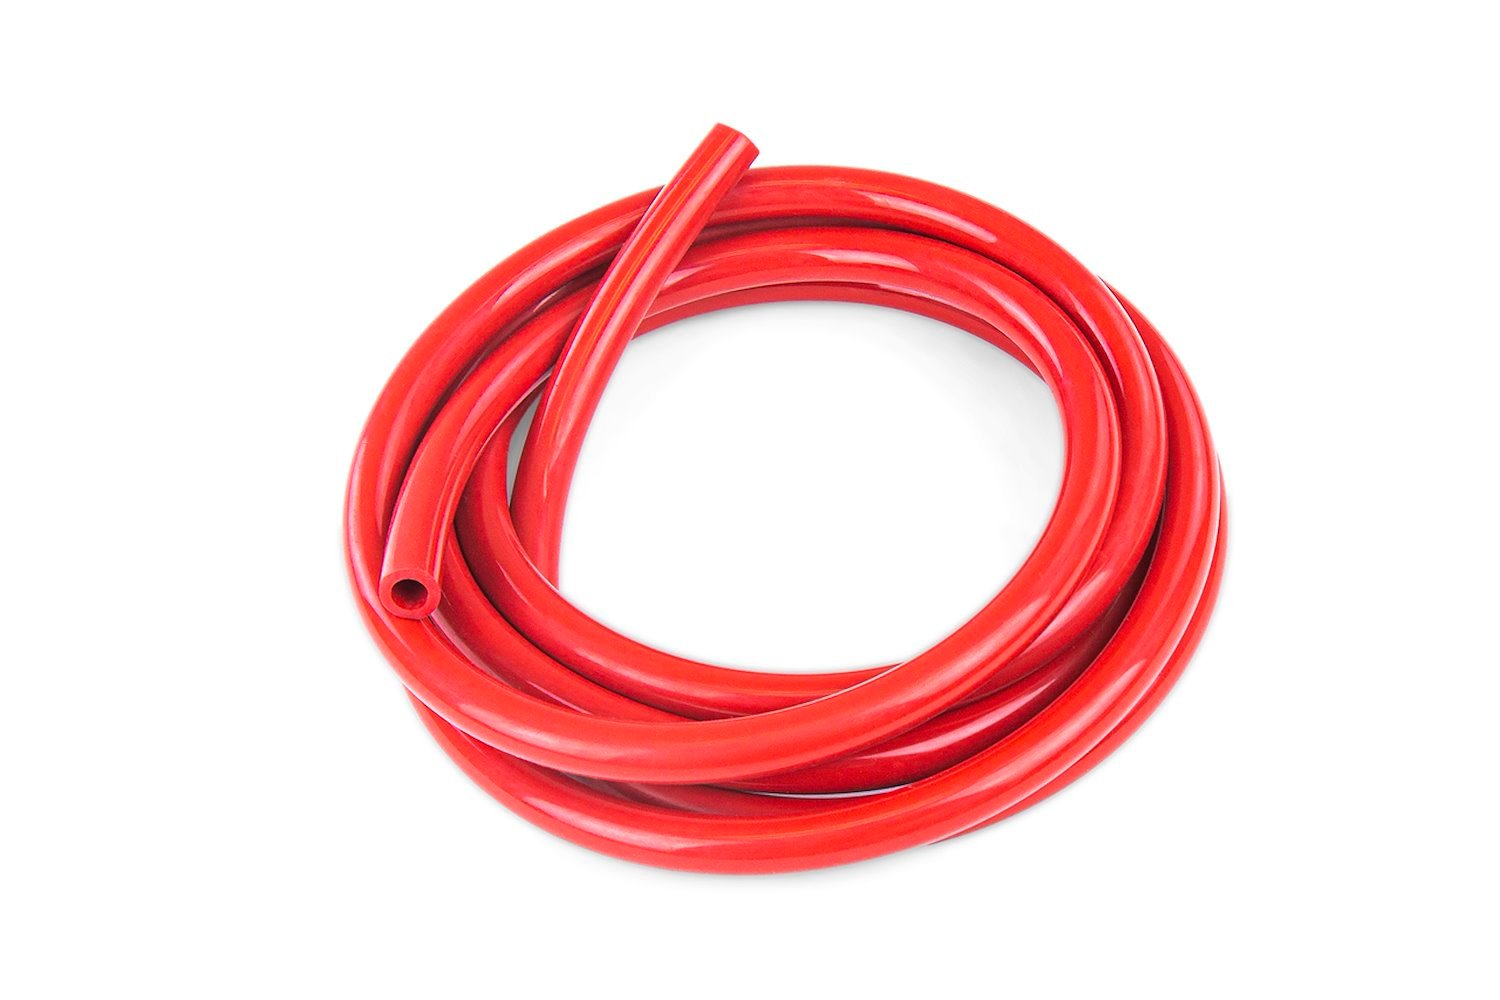 HTSVH3TW-REDx25 High-Temperature Silicone Vacuum Hose Tubing, 1/8 in. ID, 25 ft. Roll, Red